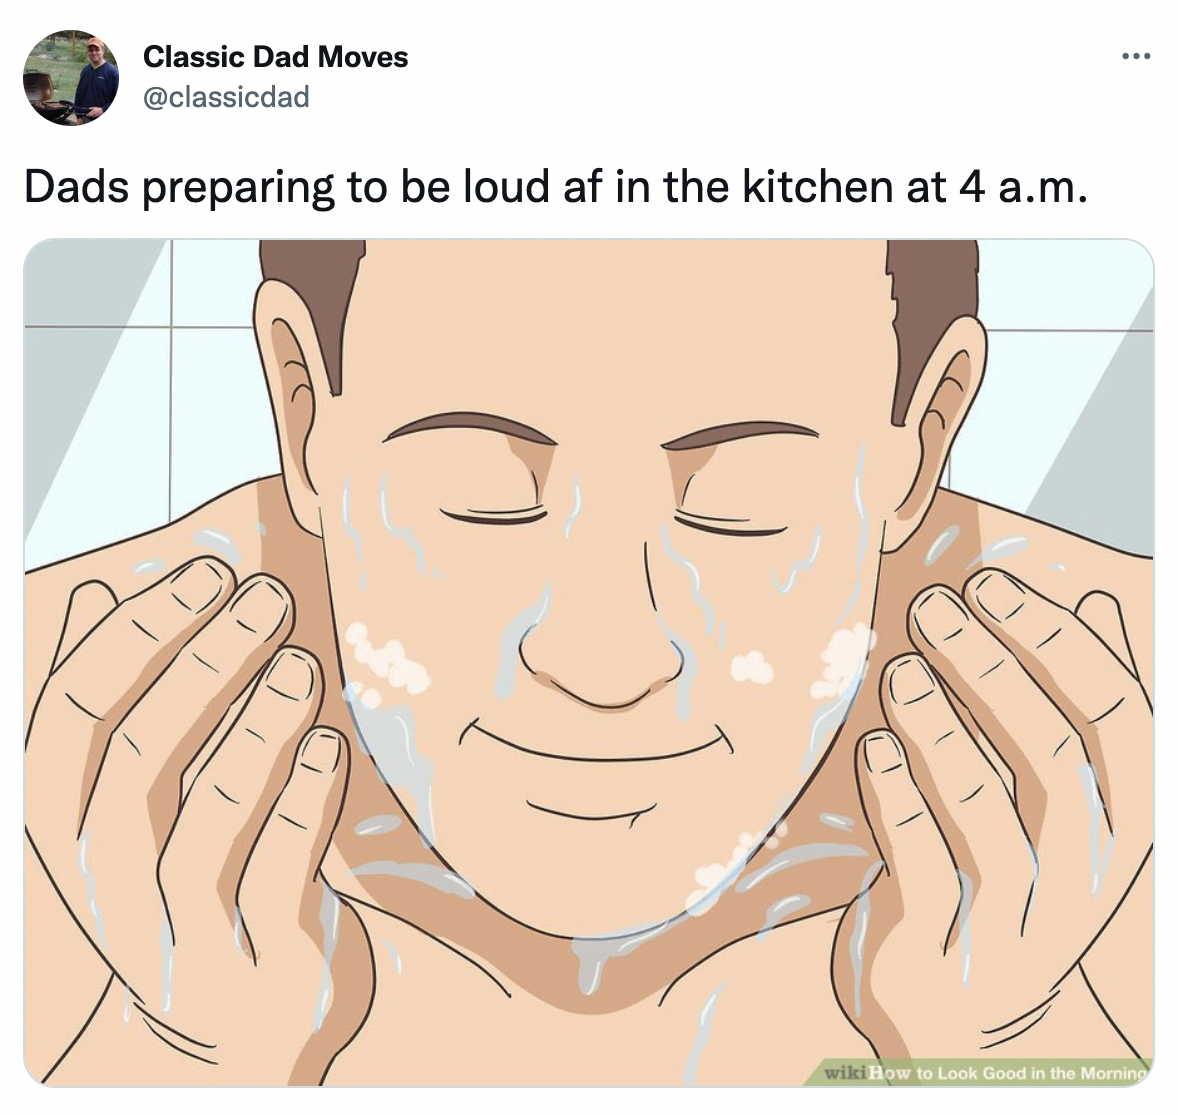 Dank Dad Memes - cum good for your face - Classic Dad Moves Dads preparing to be loud af in the kitchen at 4 a.m. wiki How to Look Good in the Morning